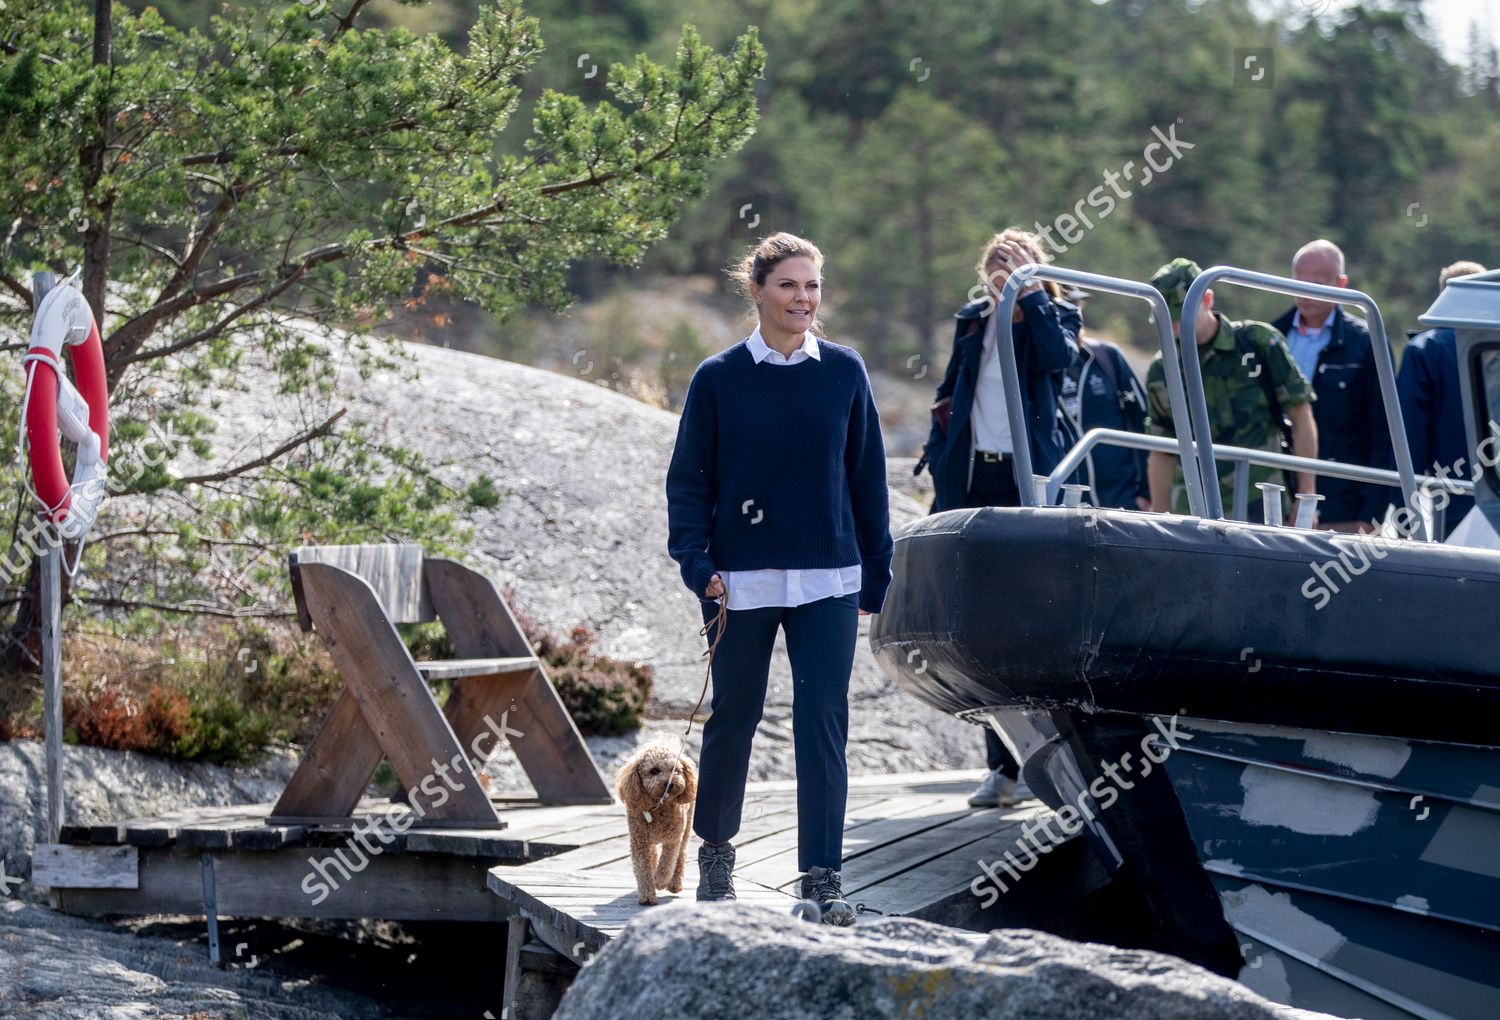 crown-princess-victoria-and-her-dog-rio-visit-alo-and-uto-sweden-shutterstock-editorial-12361980s.jpg